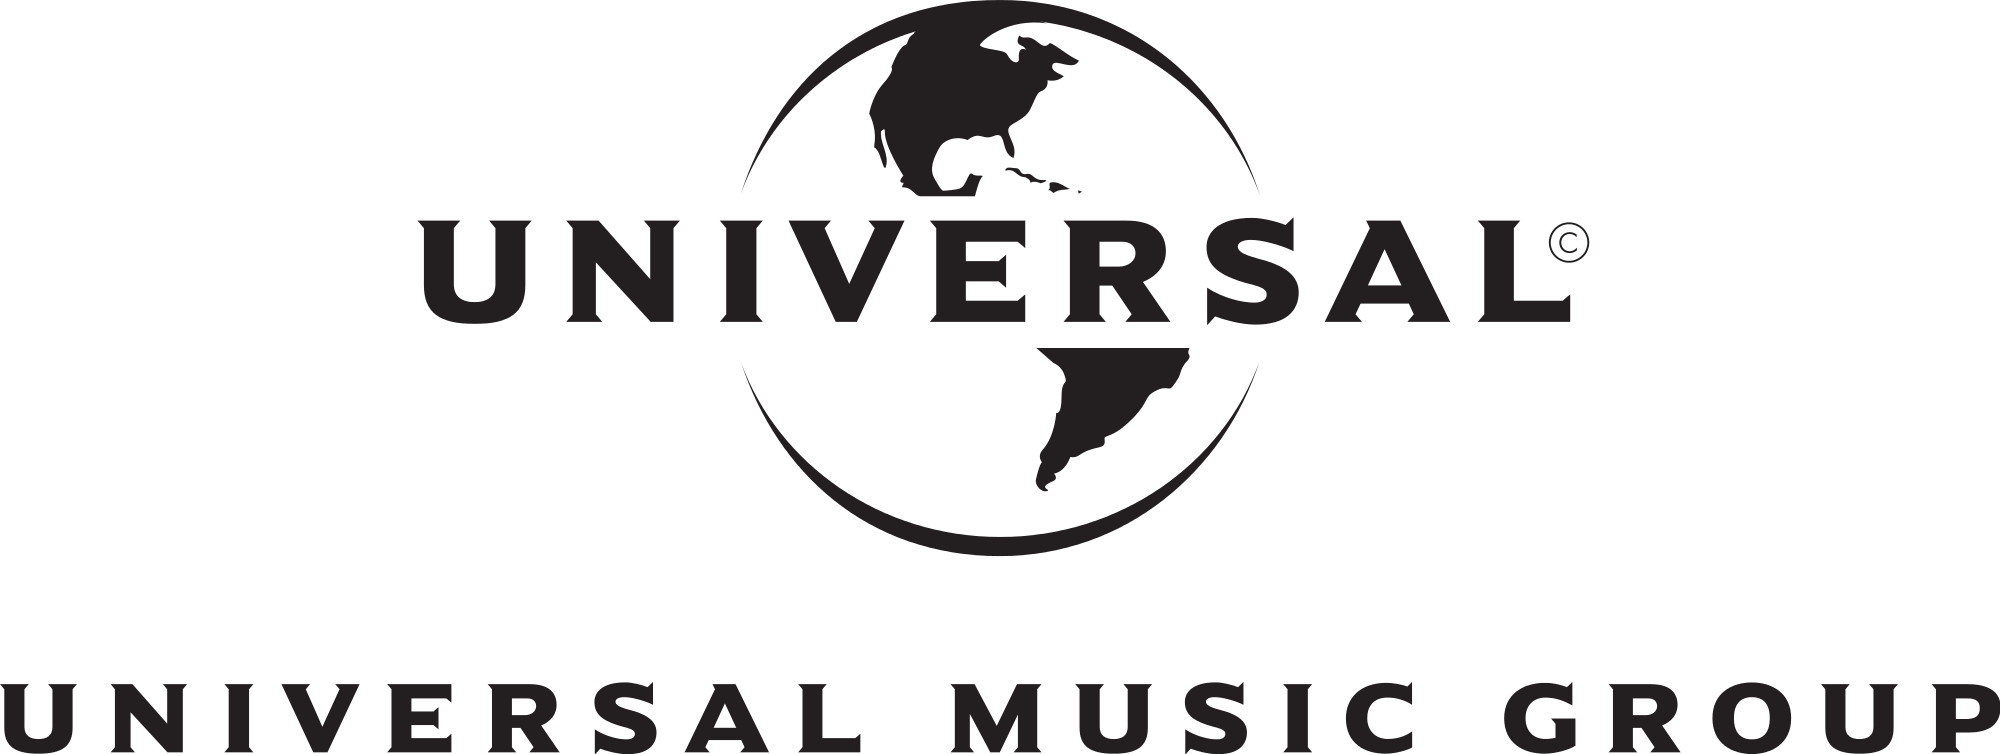 Universal Music Revenues Rise Despite Decline In Sales Thanks To Streaming